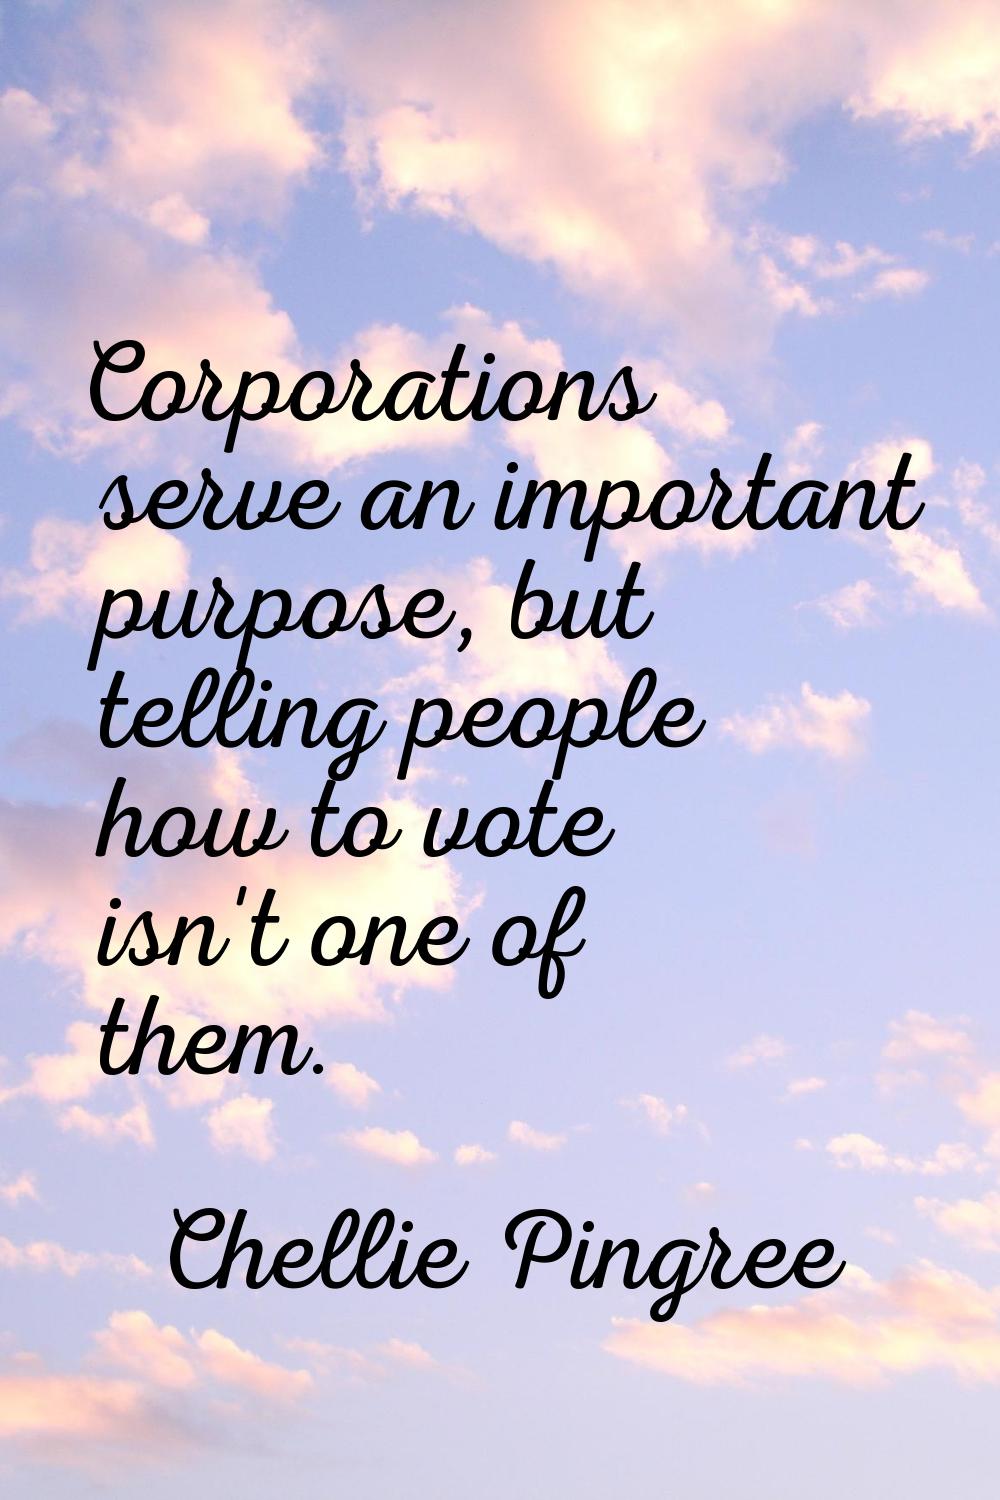 Corporations serve an important purpose, but telling people how to vote isn't one of them.